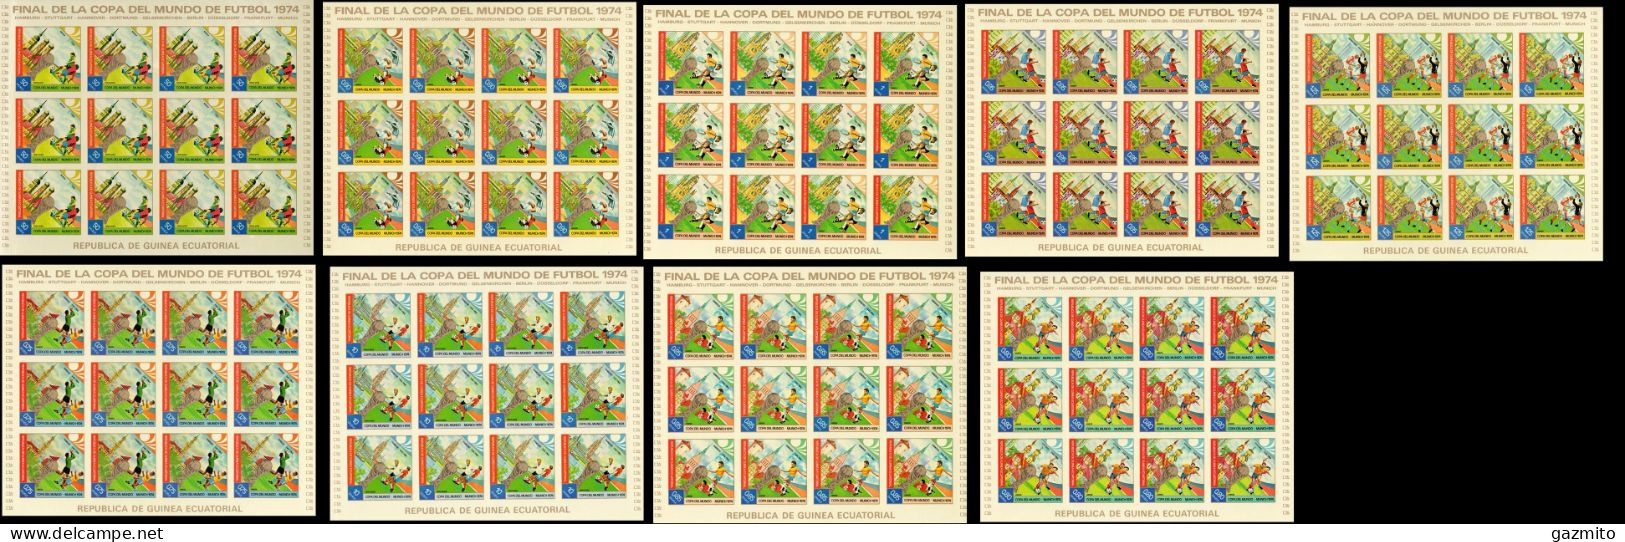 Guinea Equat. 1974, Football World Cup In Germany, 9sheetlets IMPERFORATED - Guinea Ecuatorial